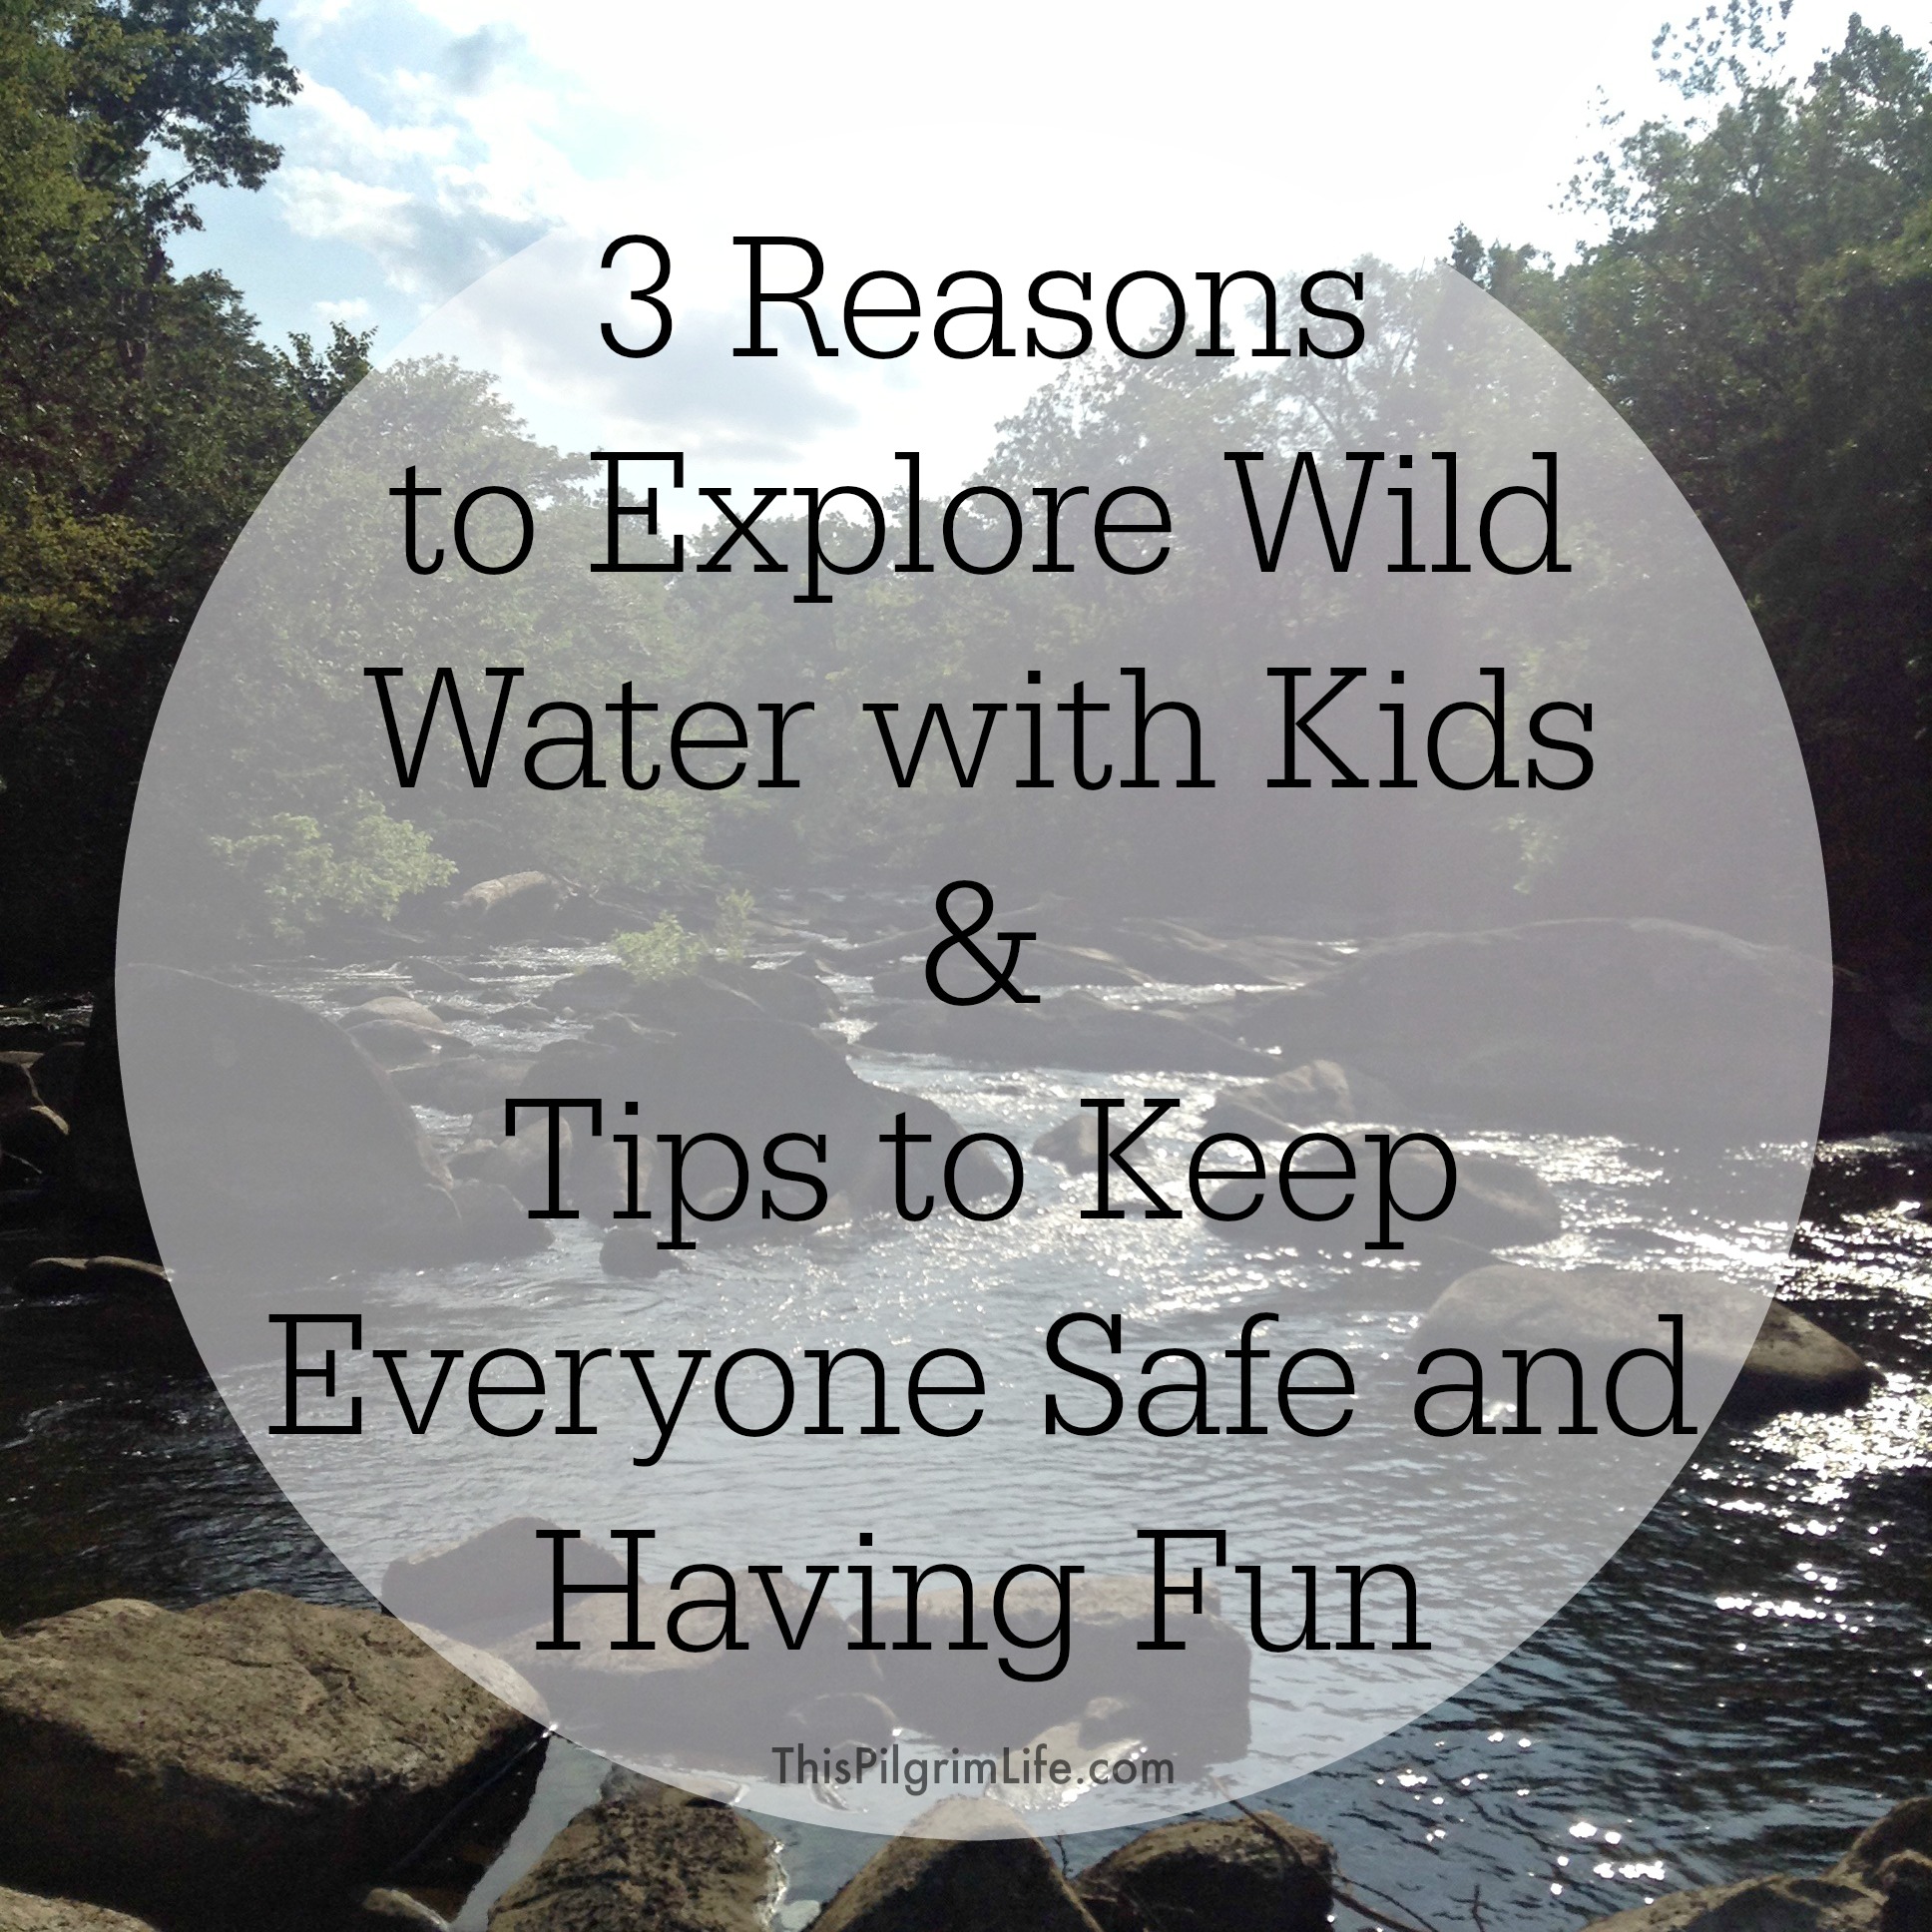 3 Reasons to Explore Wild Water with Kids & Tips to Keep Everyone Safe and Having Fun